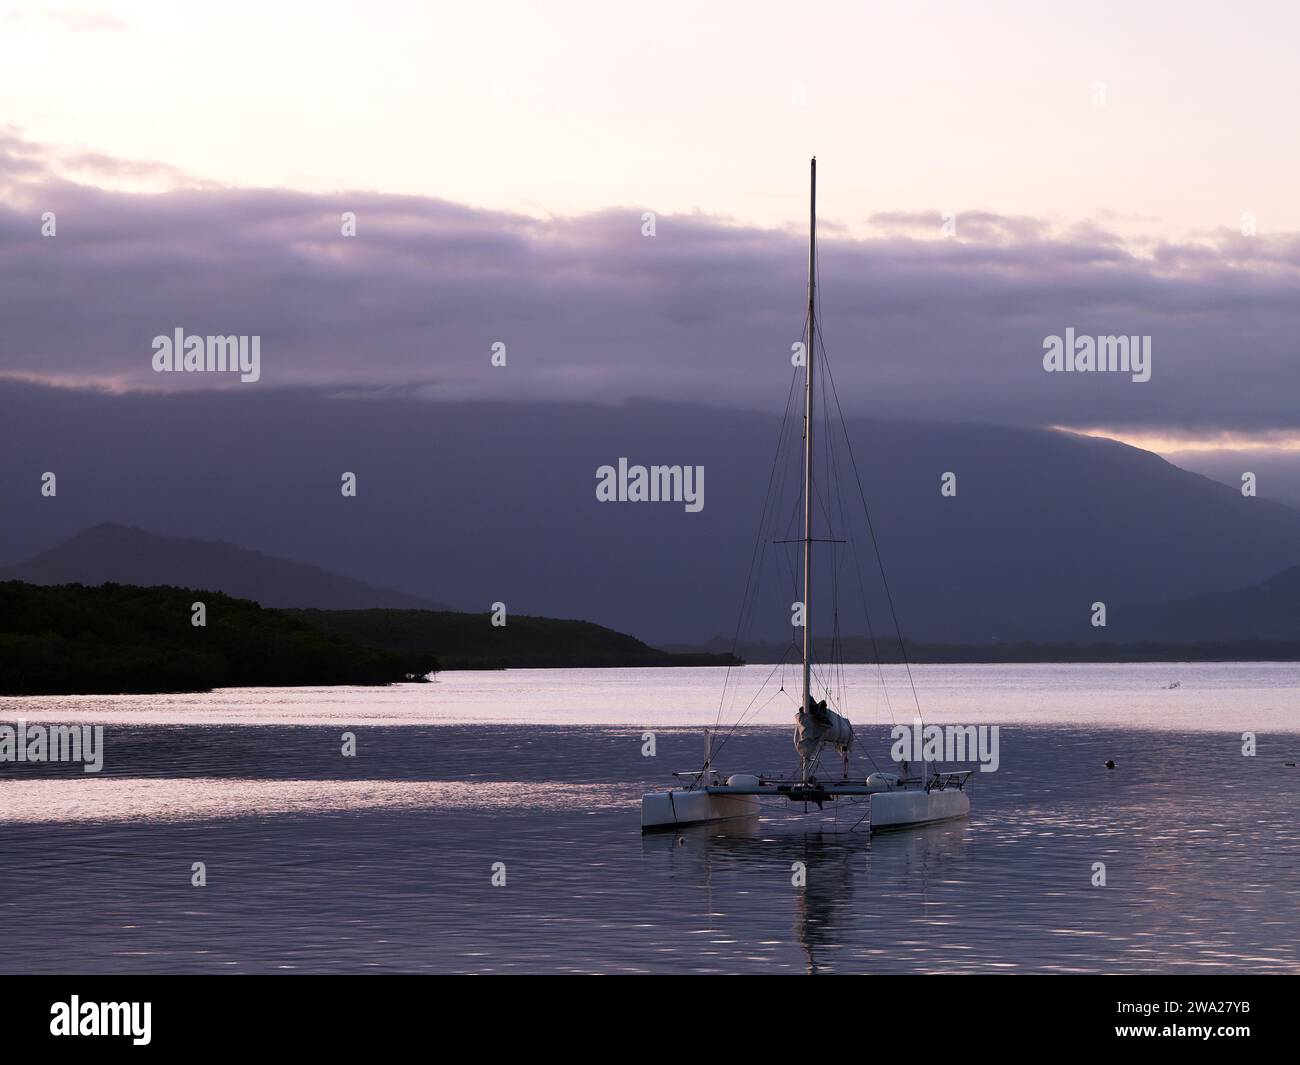 View of the sun setting over the distant hills and a catamaran moored in the foreground in Port Douglas Queensland Australia Stock Photo